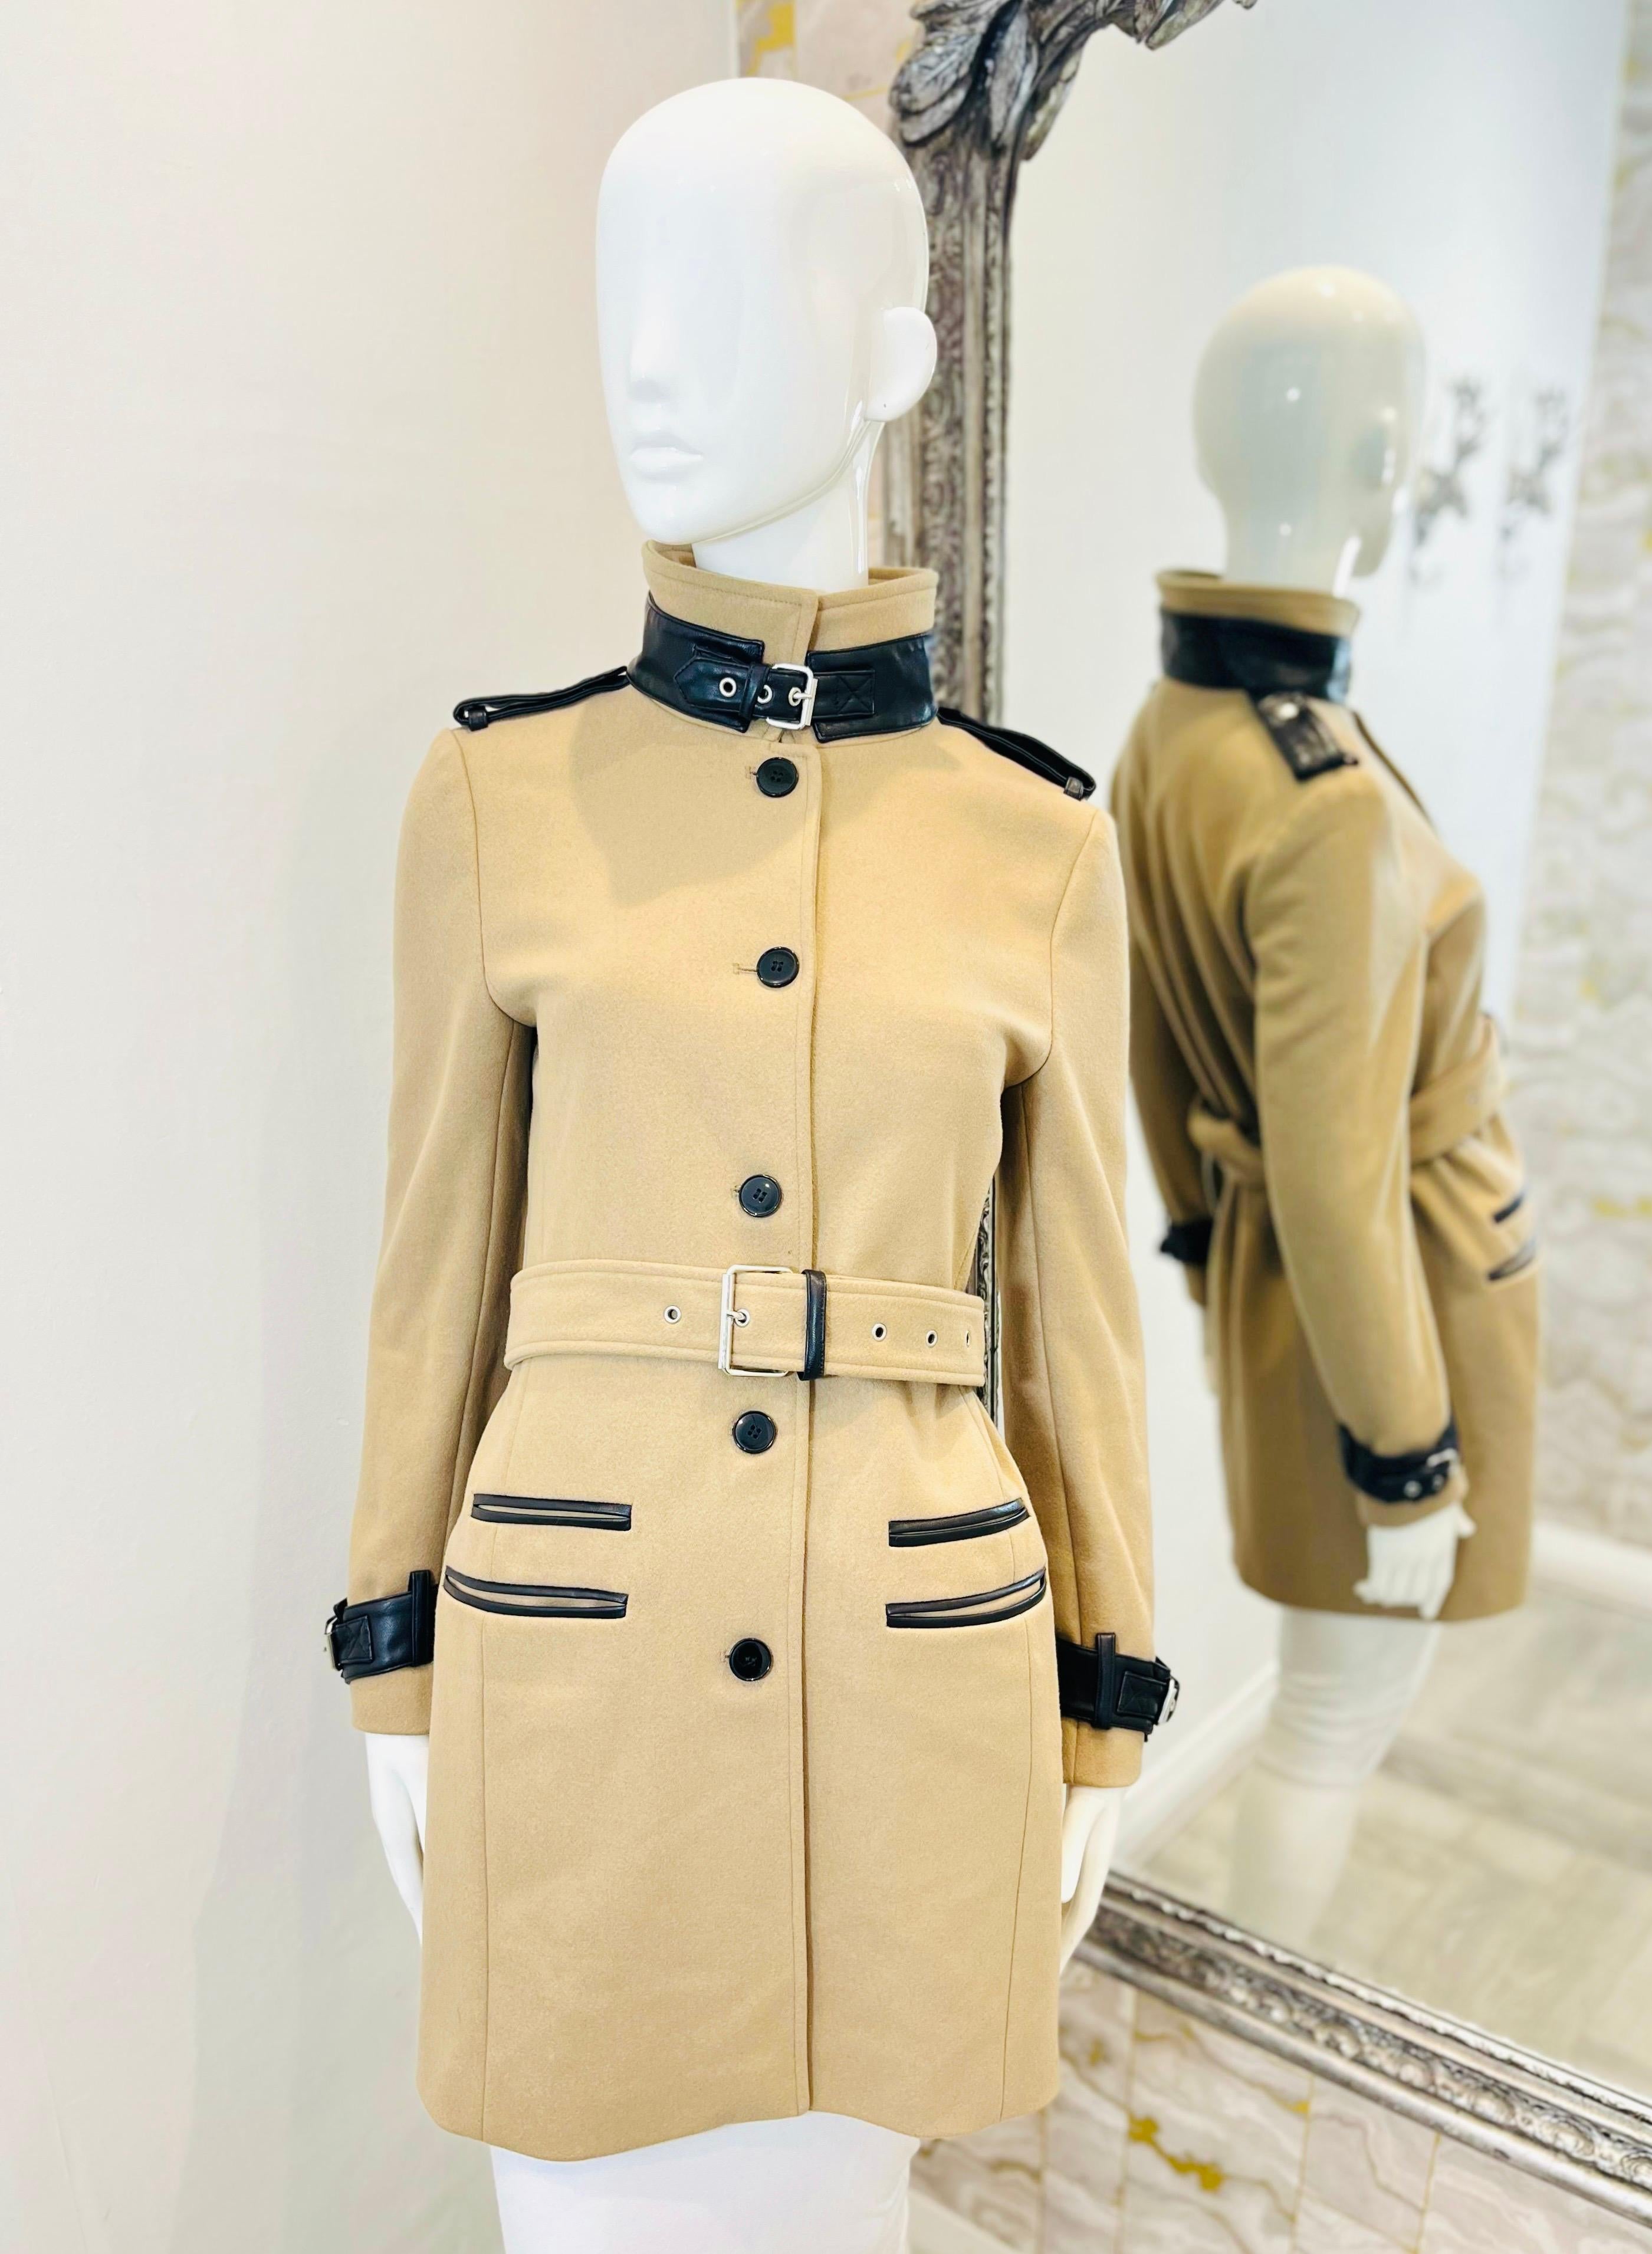 The Kooples Wool & Cashmere Coat With Leather Trim

Beige, single-breasted coat designed with dark brown leather trims.

Detailed with popper-fastened shoulder epaulettes and buckled straps at cuffs.

Styled with belted waist, welt pockets and